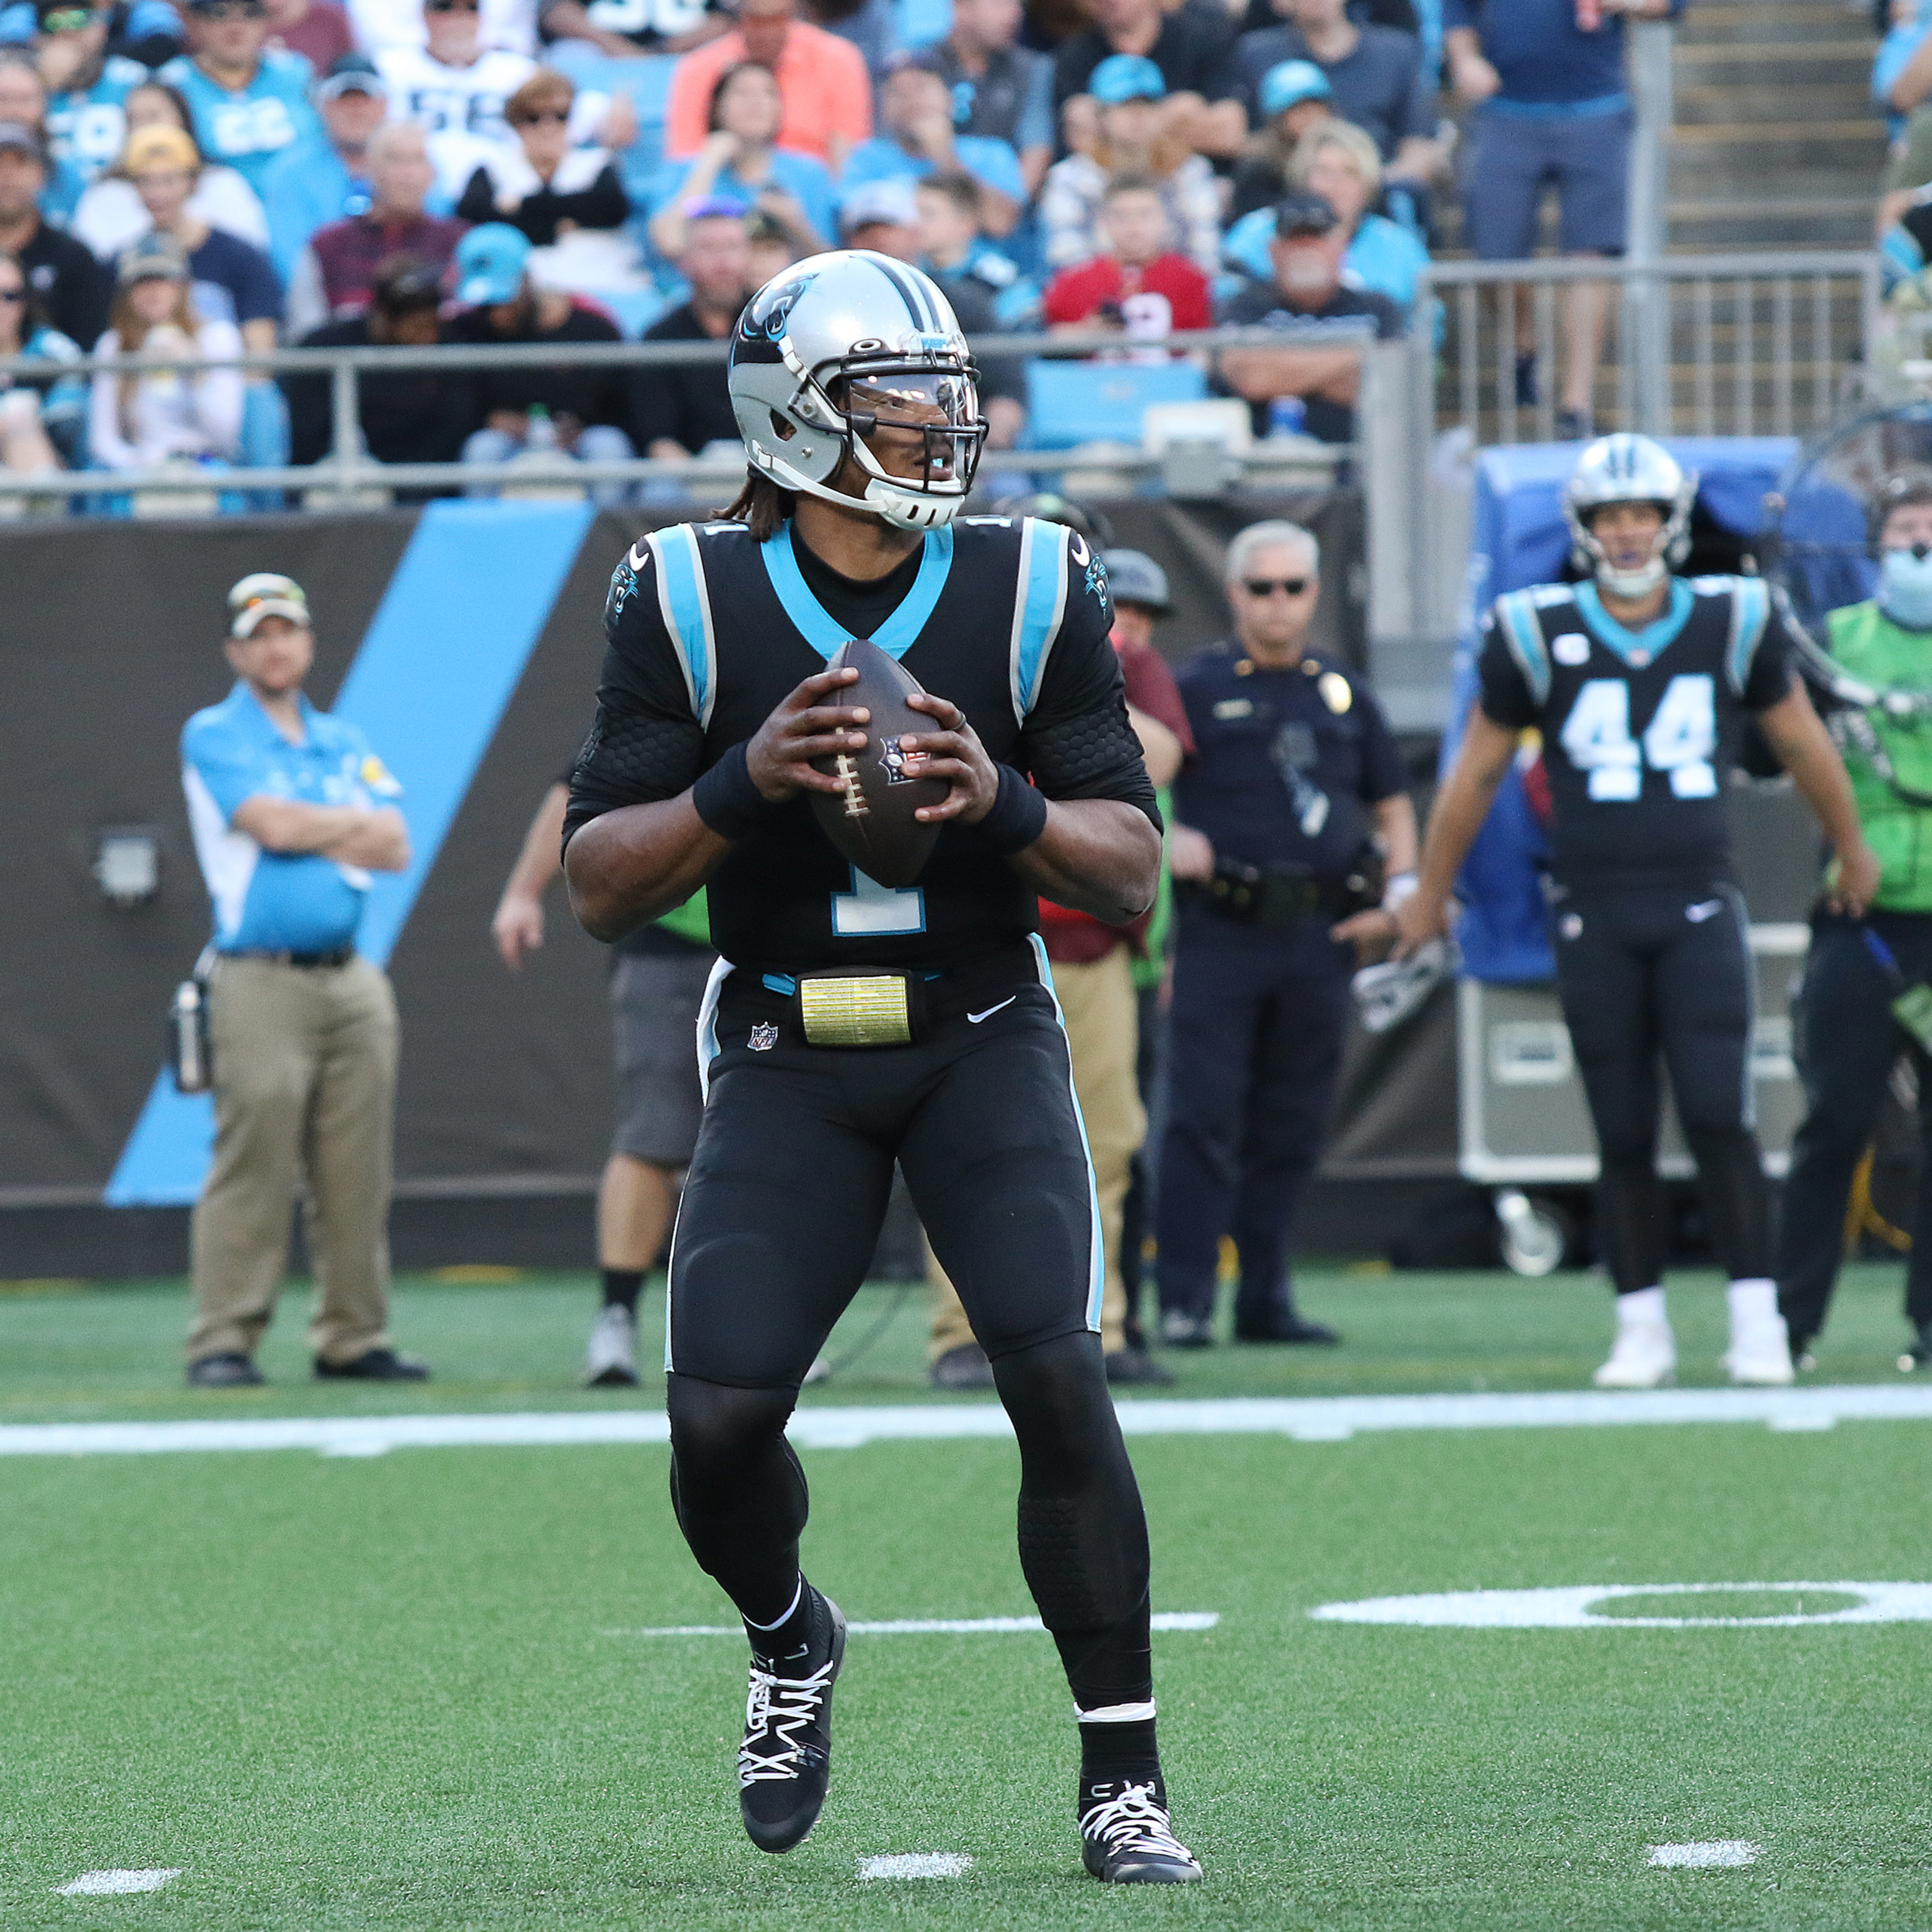 NFL’s Cam Newton Addresses Hecklers Who ‘Say Something Demonizing’ About Players